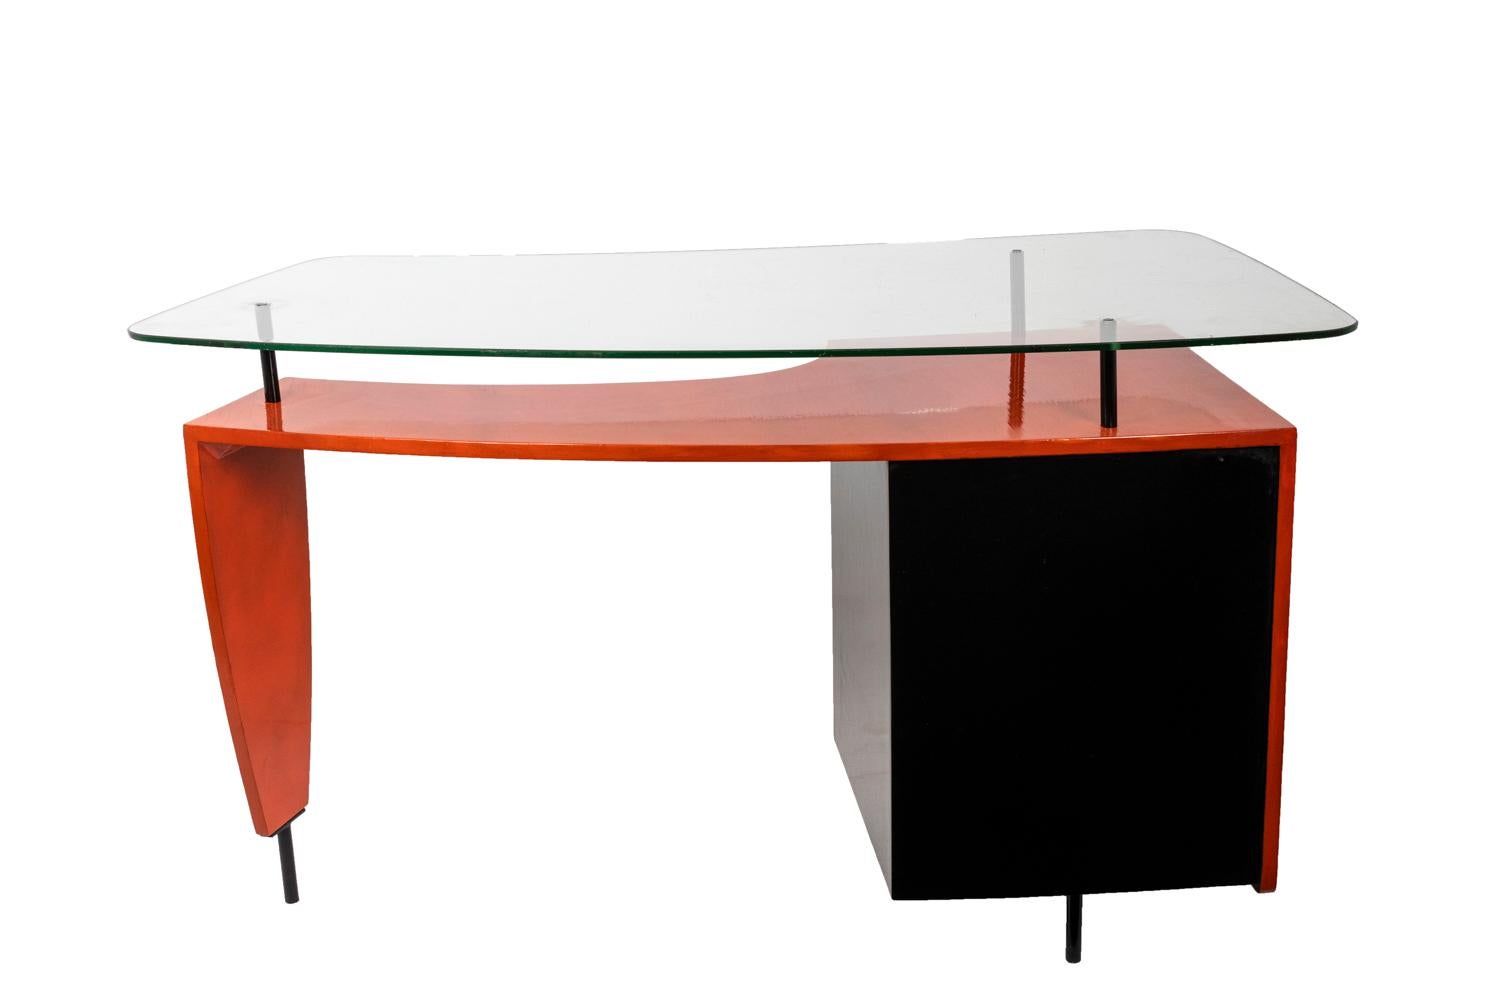 Left compartment desk in black and orange lacquered wood opening by four drawers. The desk stands on three black lacquered metal legs. The first orange lacquered half-moon-shaped tray is topped by a curved glass tray standing on three black